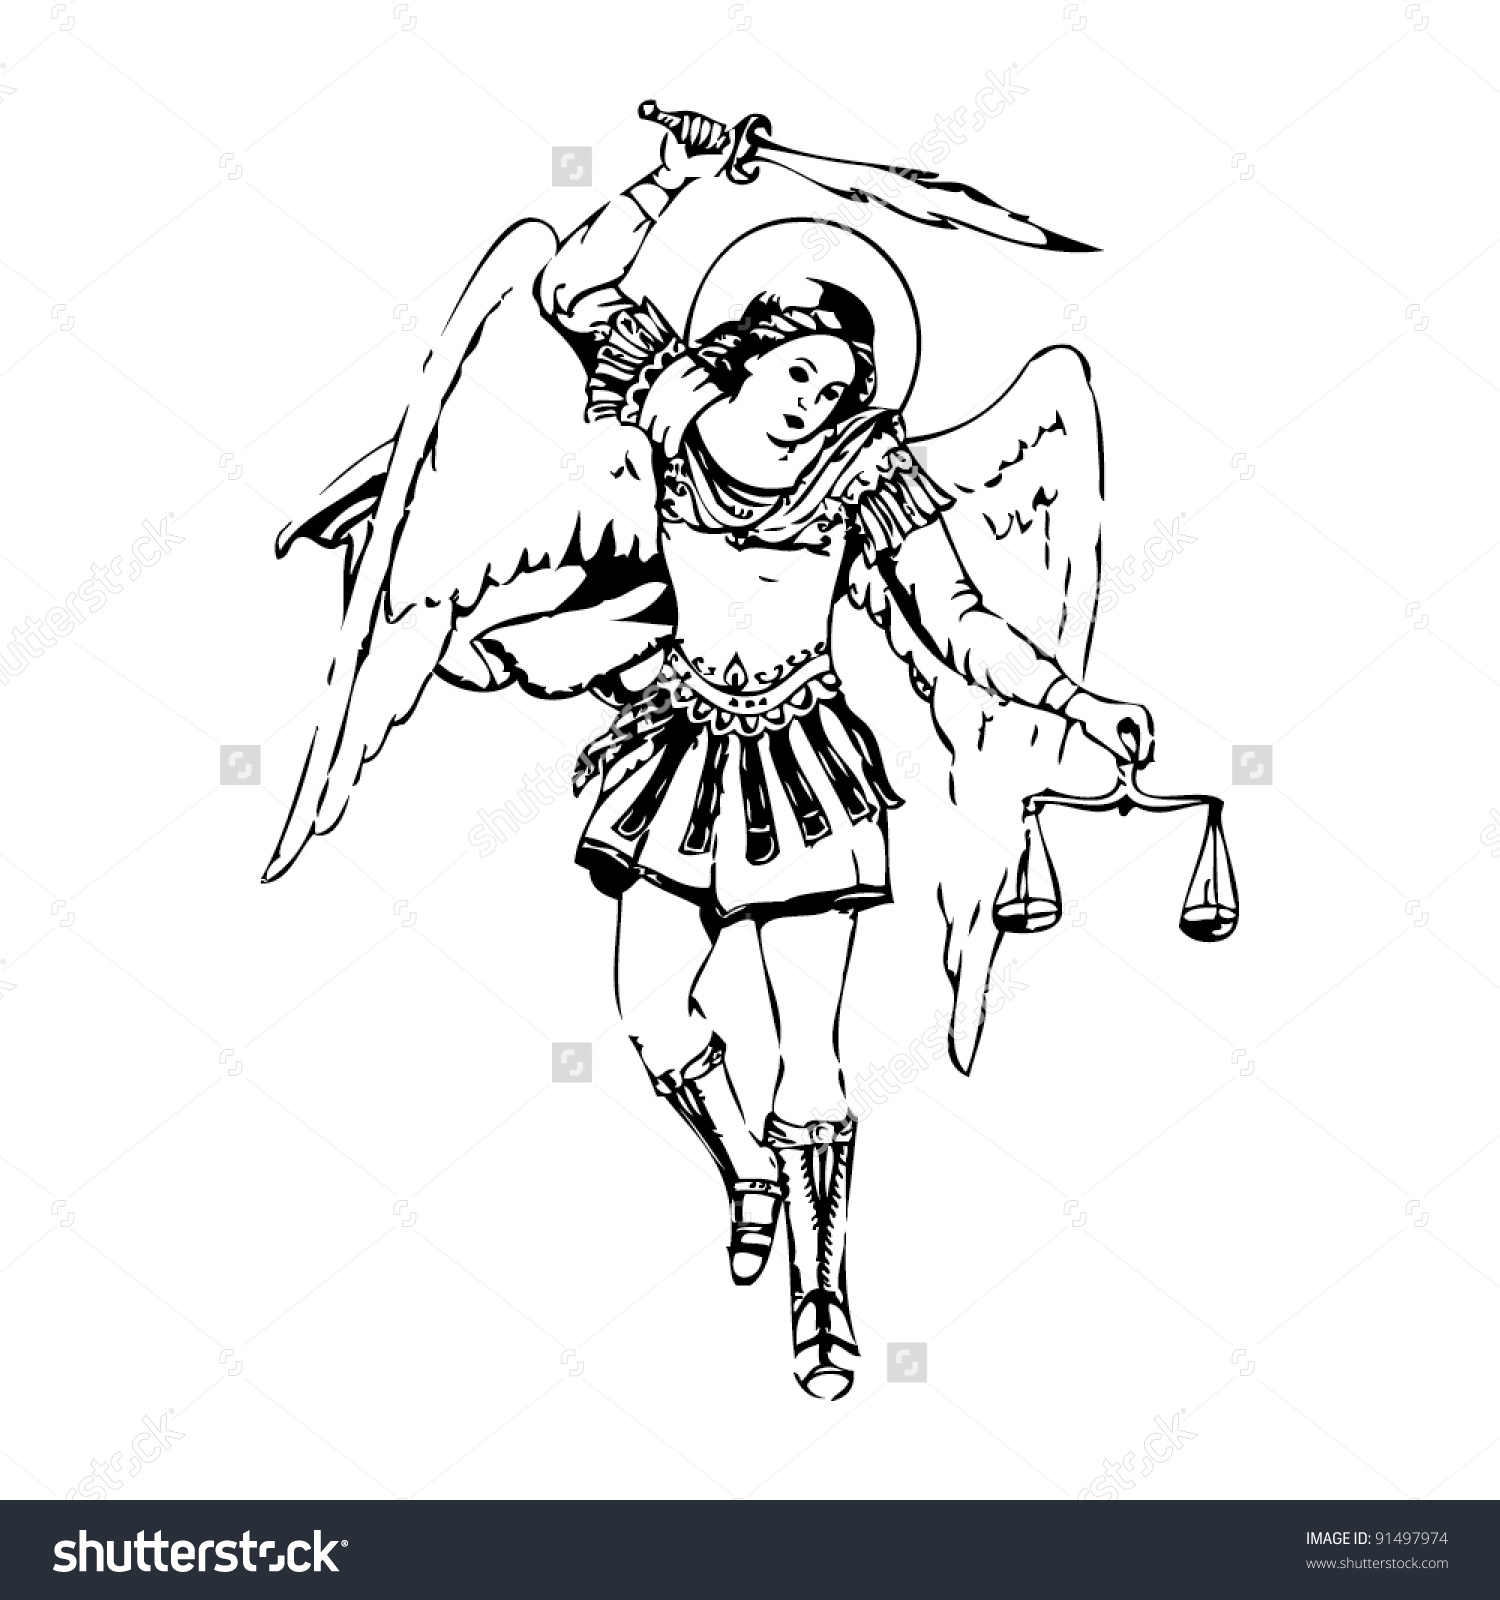 The archangel clipart - Clipground